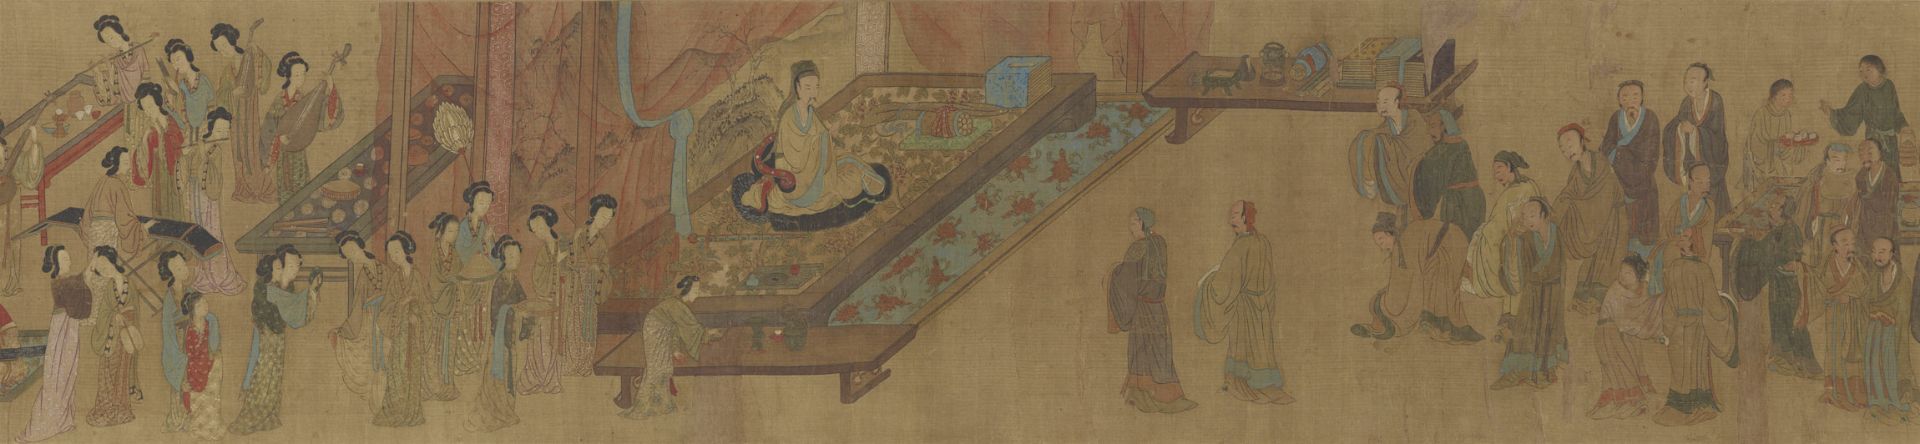 After Qian Xuan . Qing dynasty,  - Image 9 of 9